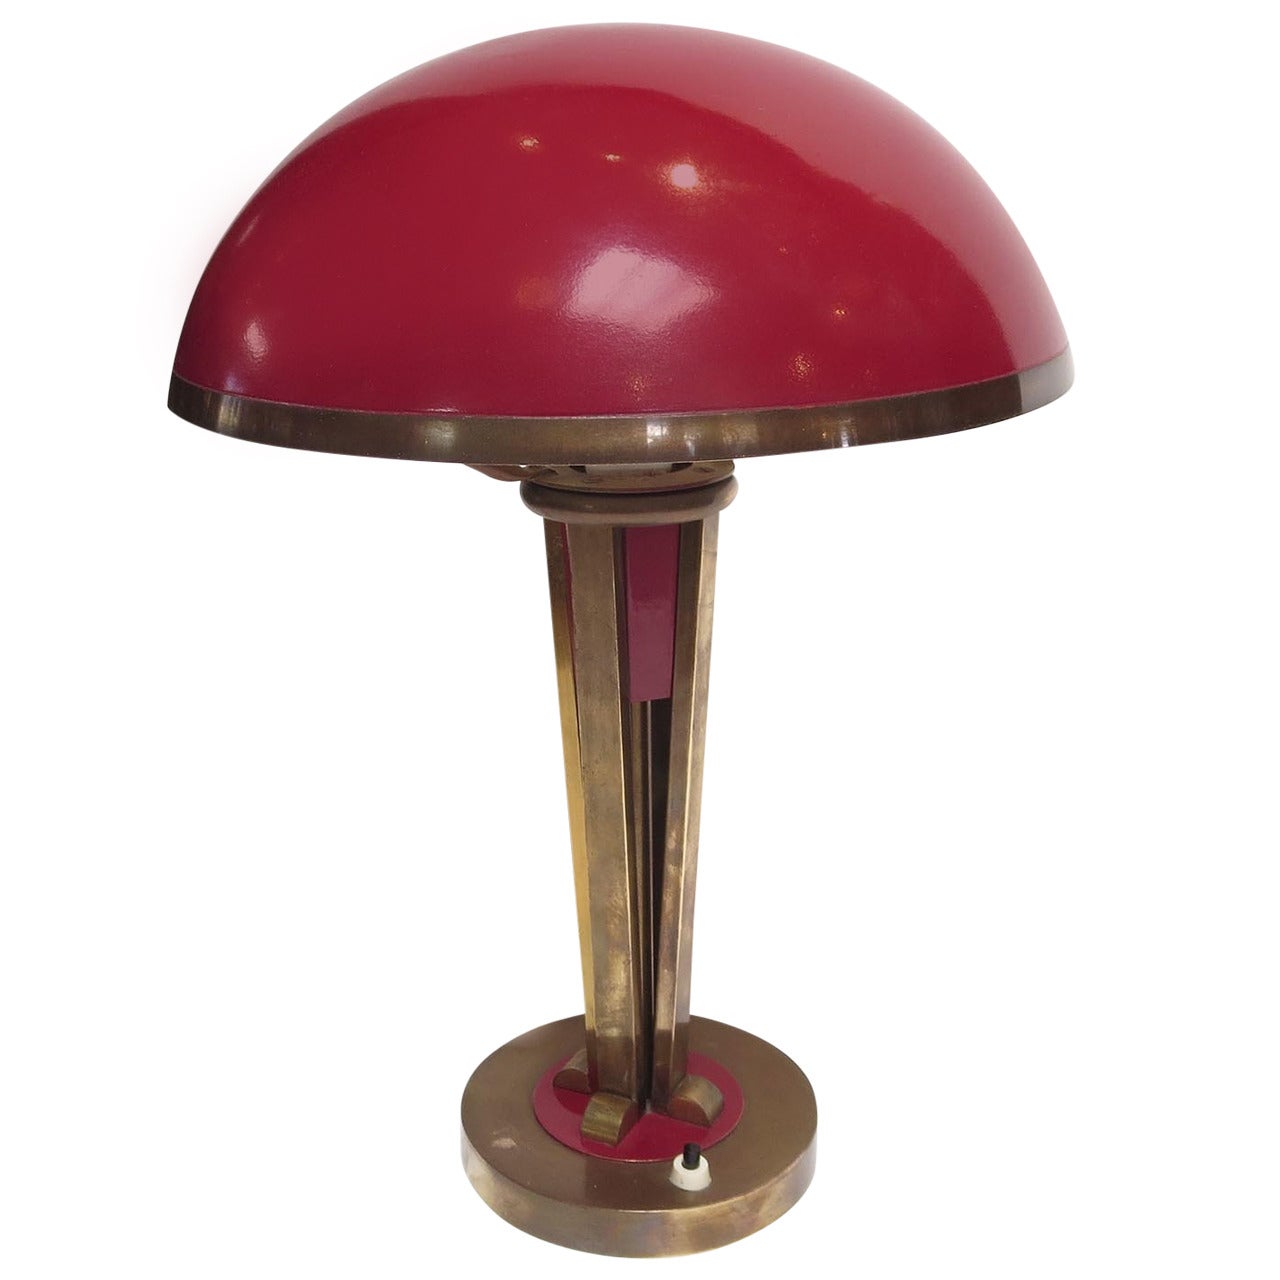 Stylish French Art Deco Table Lamp in Brass and Enamel